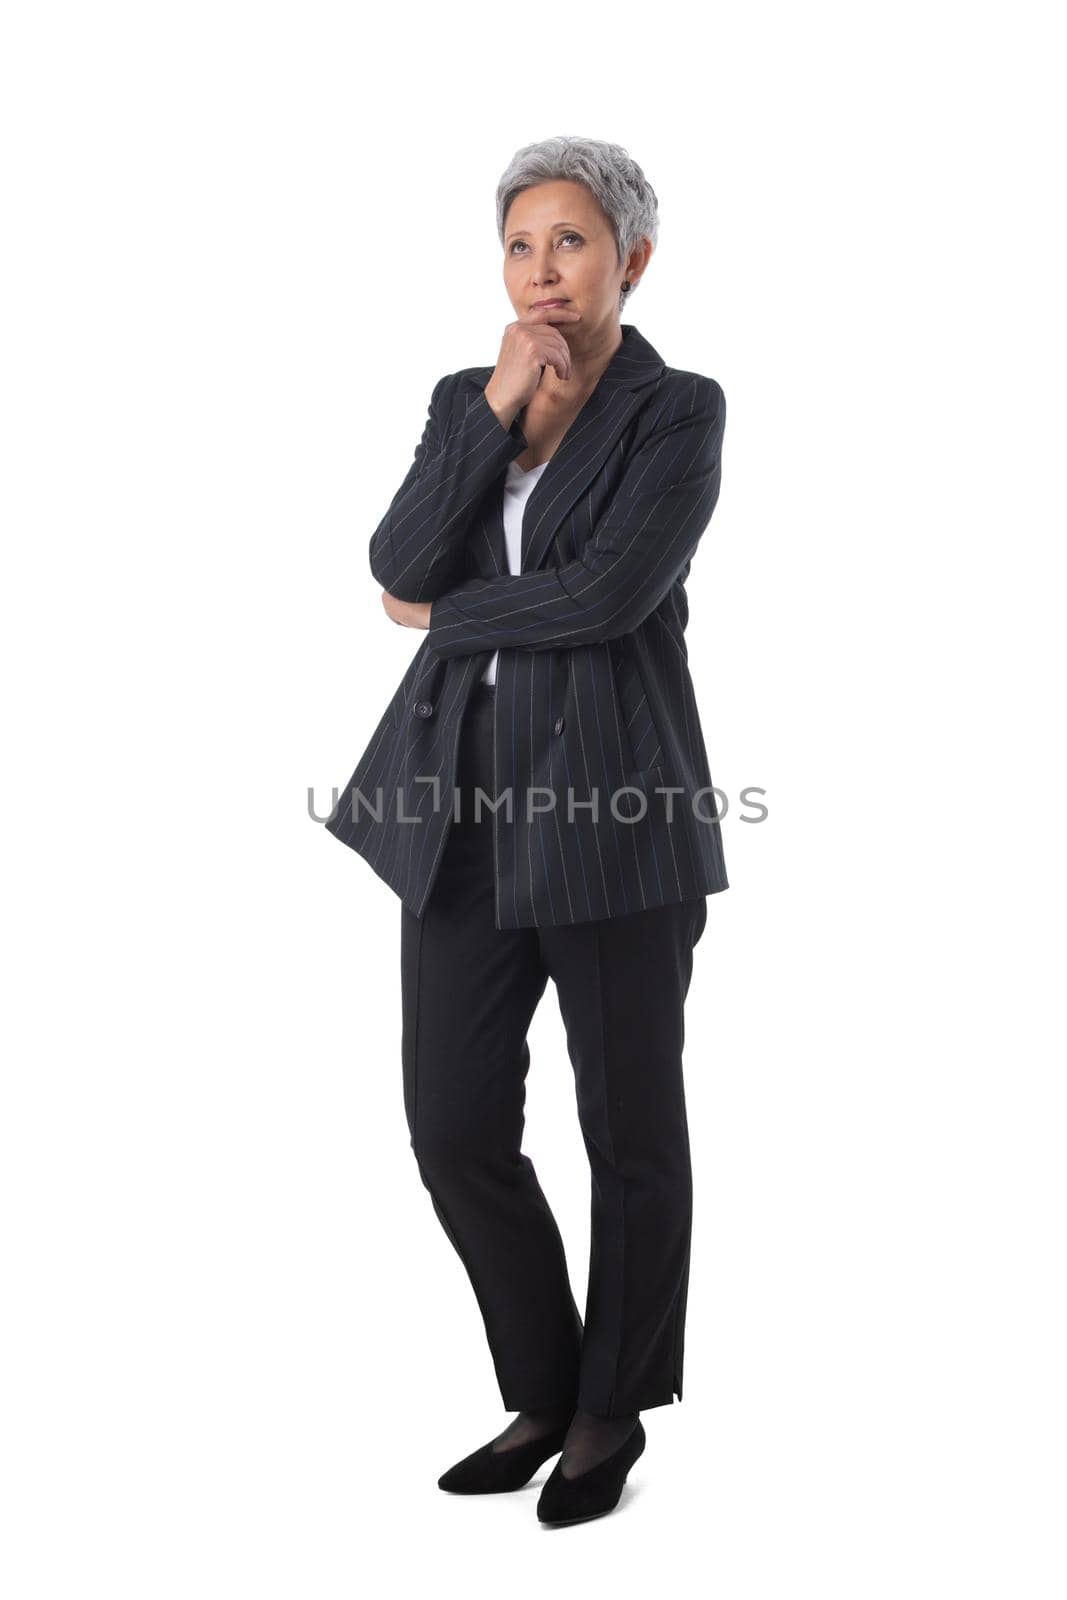 Asian business woman portrait on white by ALotOfPeople